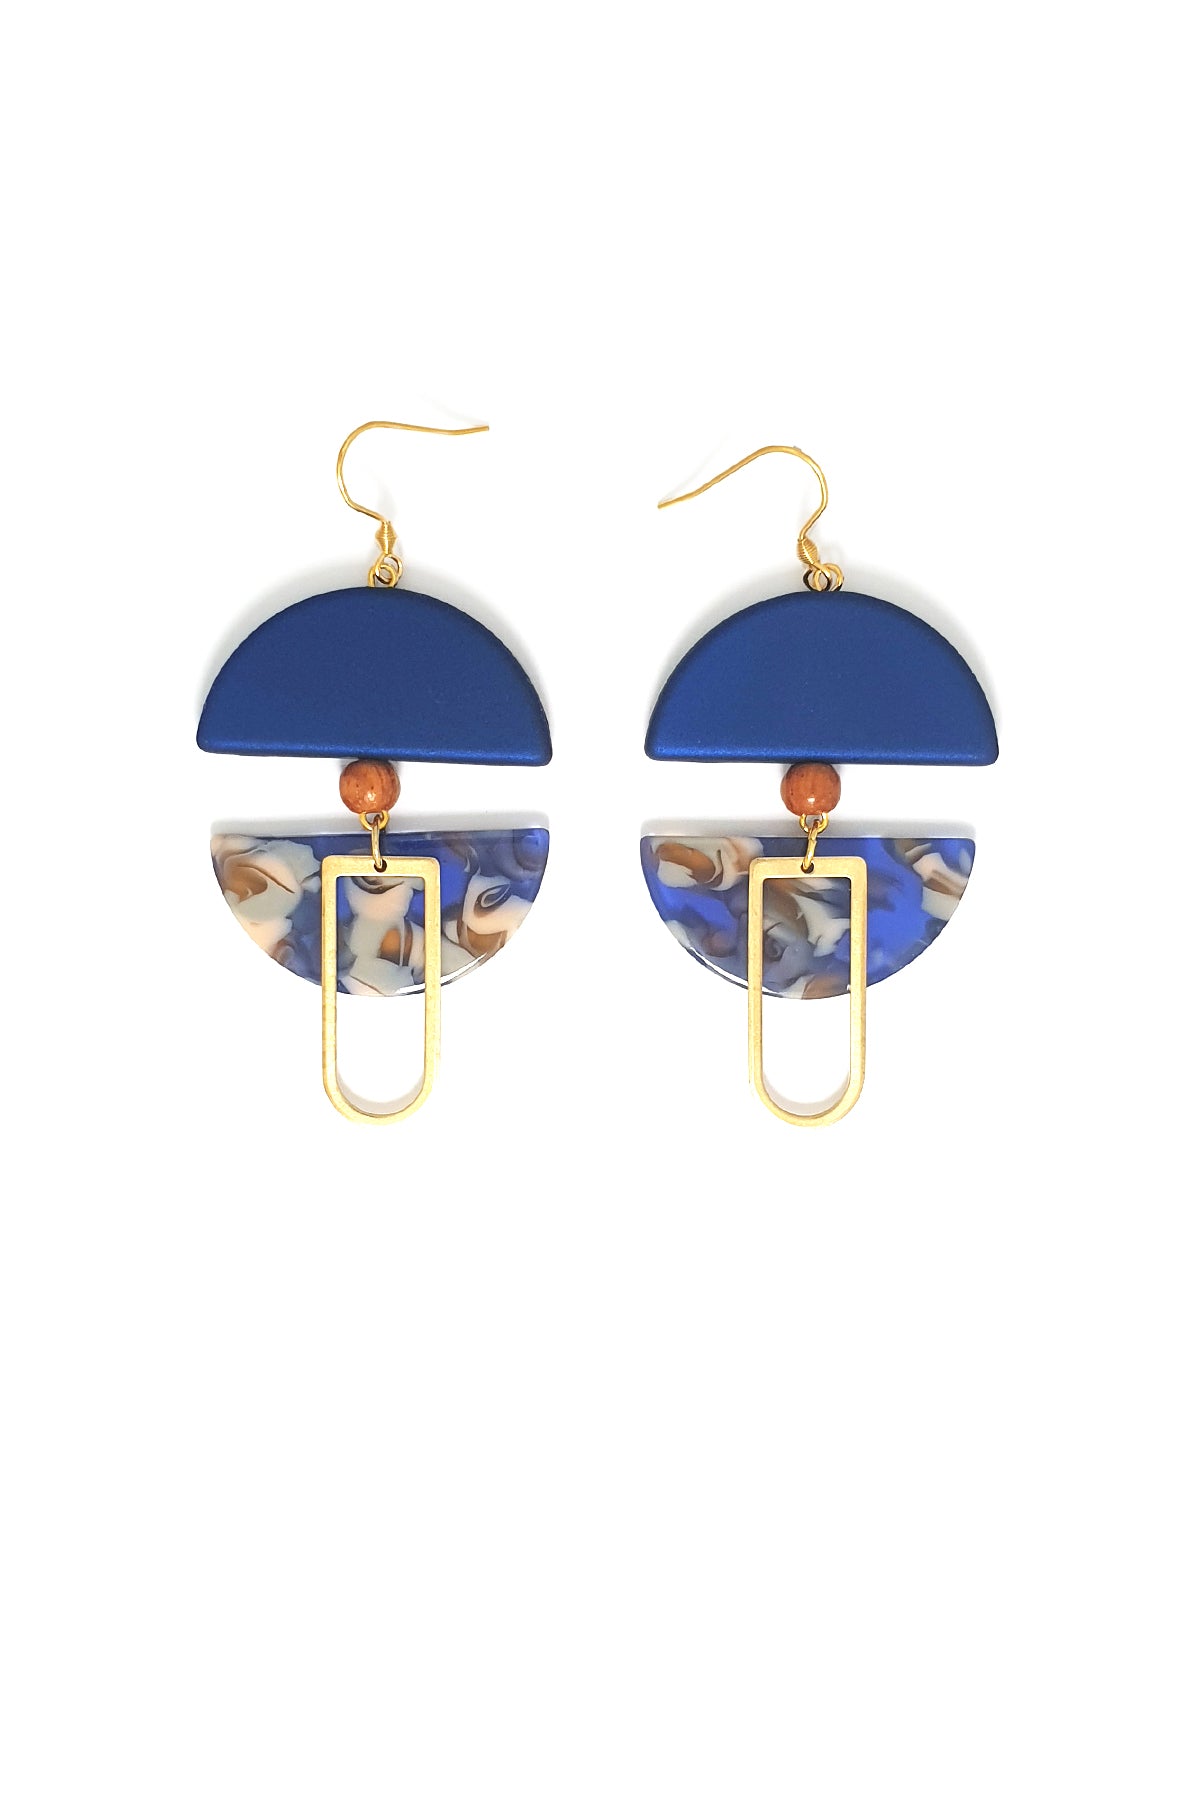 A pair of dangle earrings with a hook sit against a white background. They feature a blue arch shaped bead, a small wooden bead, a blue acrylic half circle, and an elongated D shape brass piece.